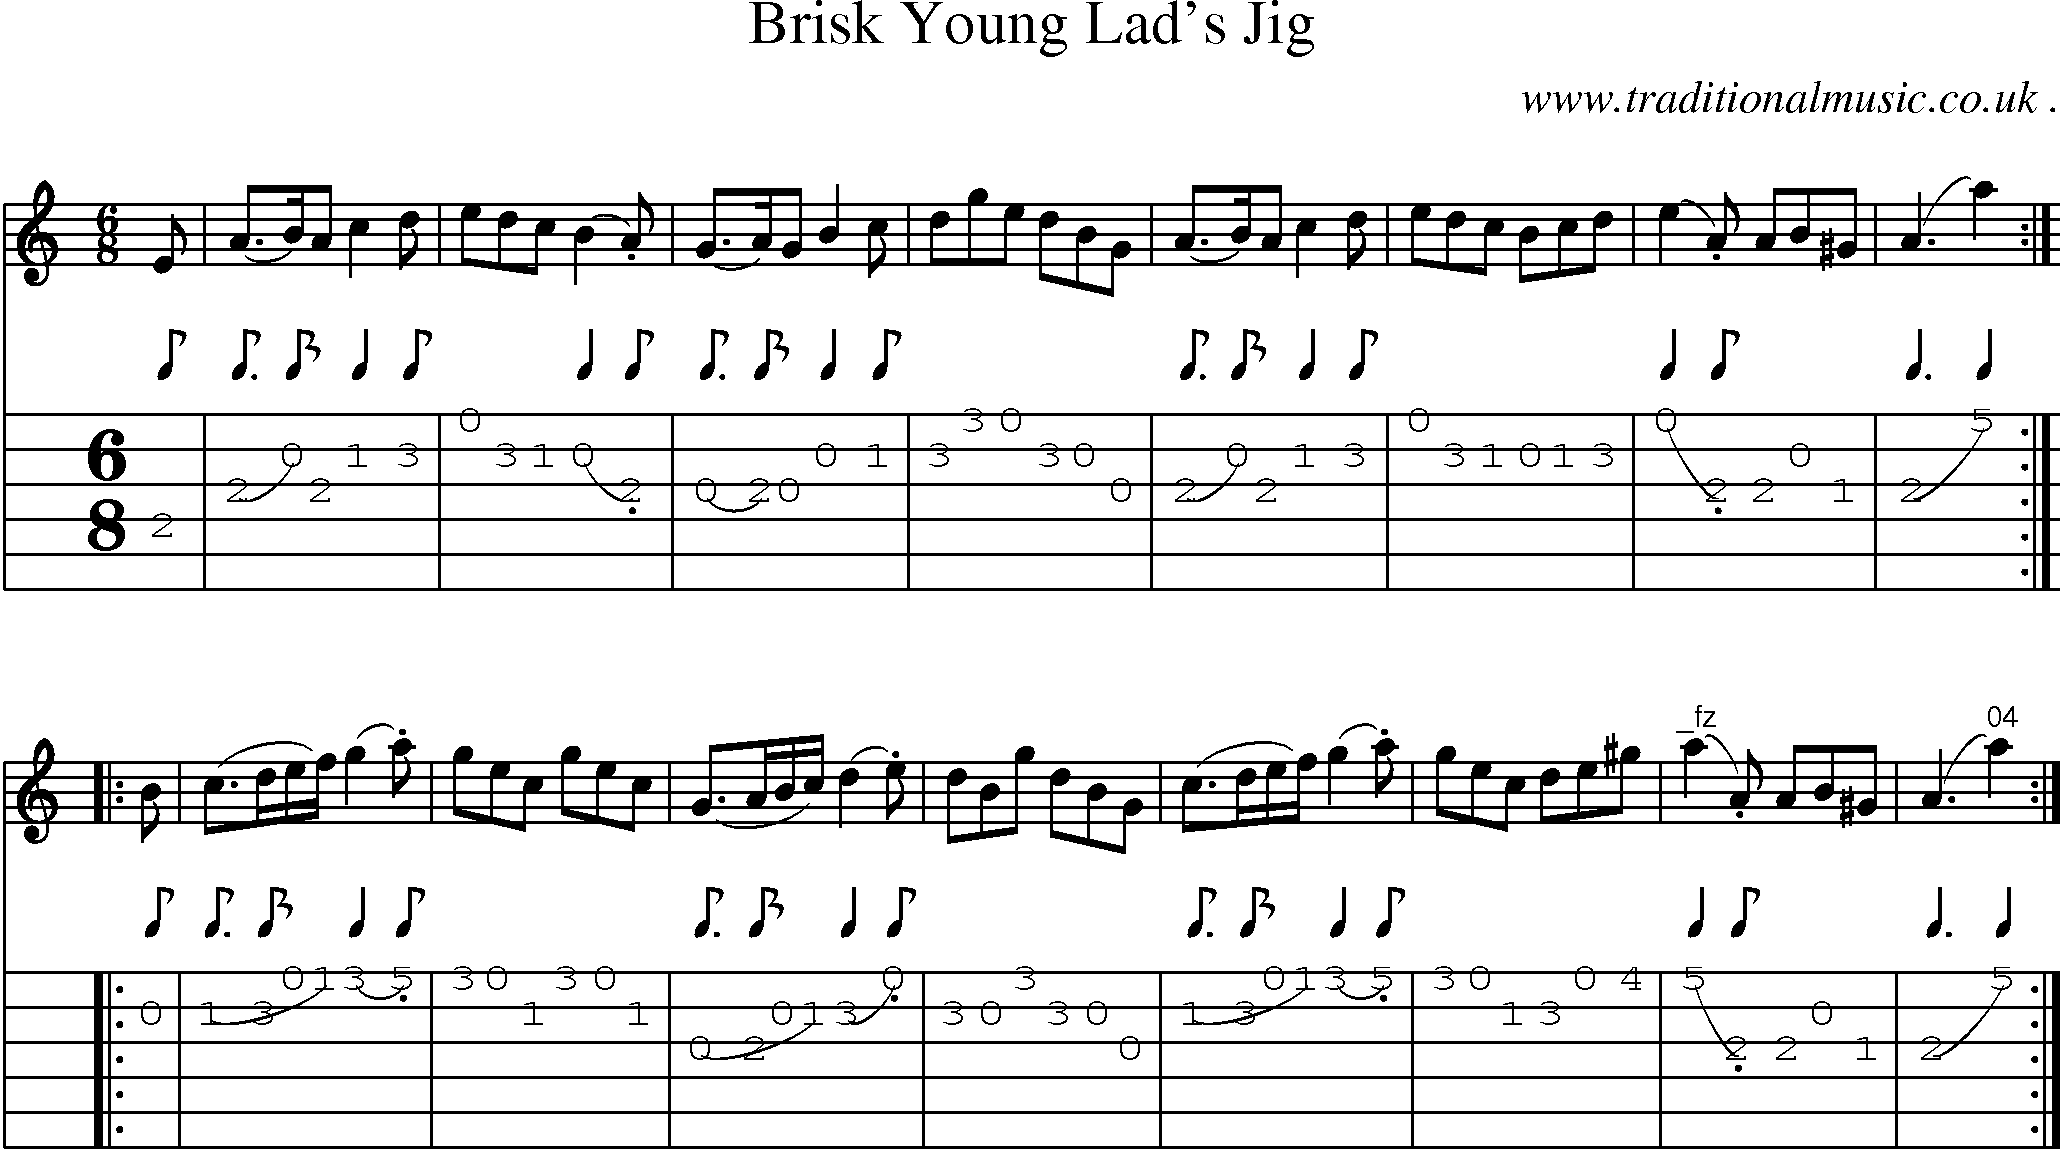 Sheet-Music and Guitar Tabs for Brisk Young Lads Jig